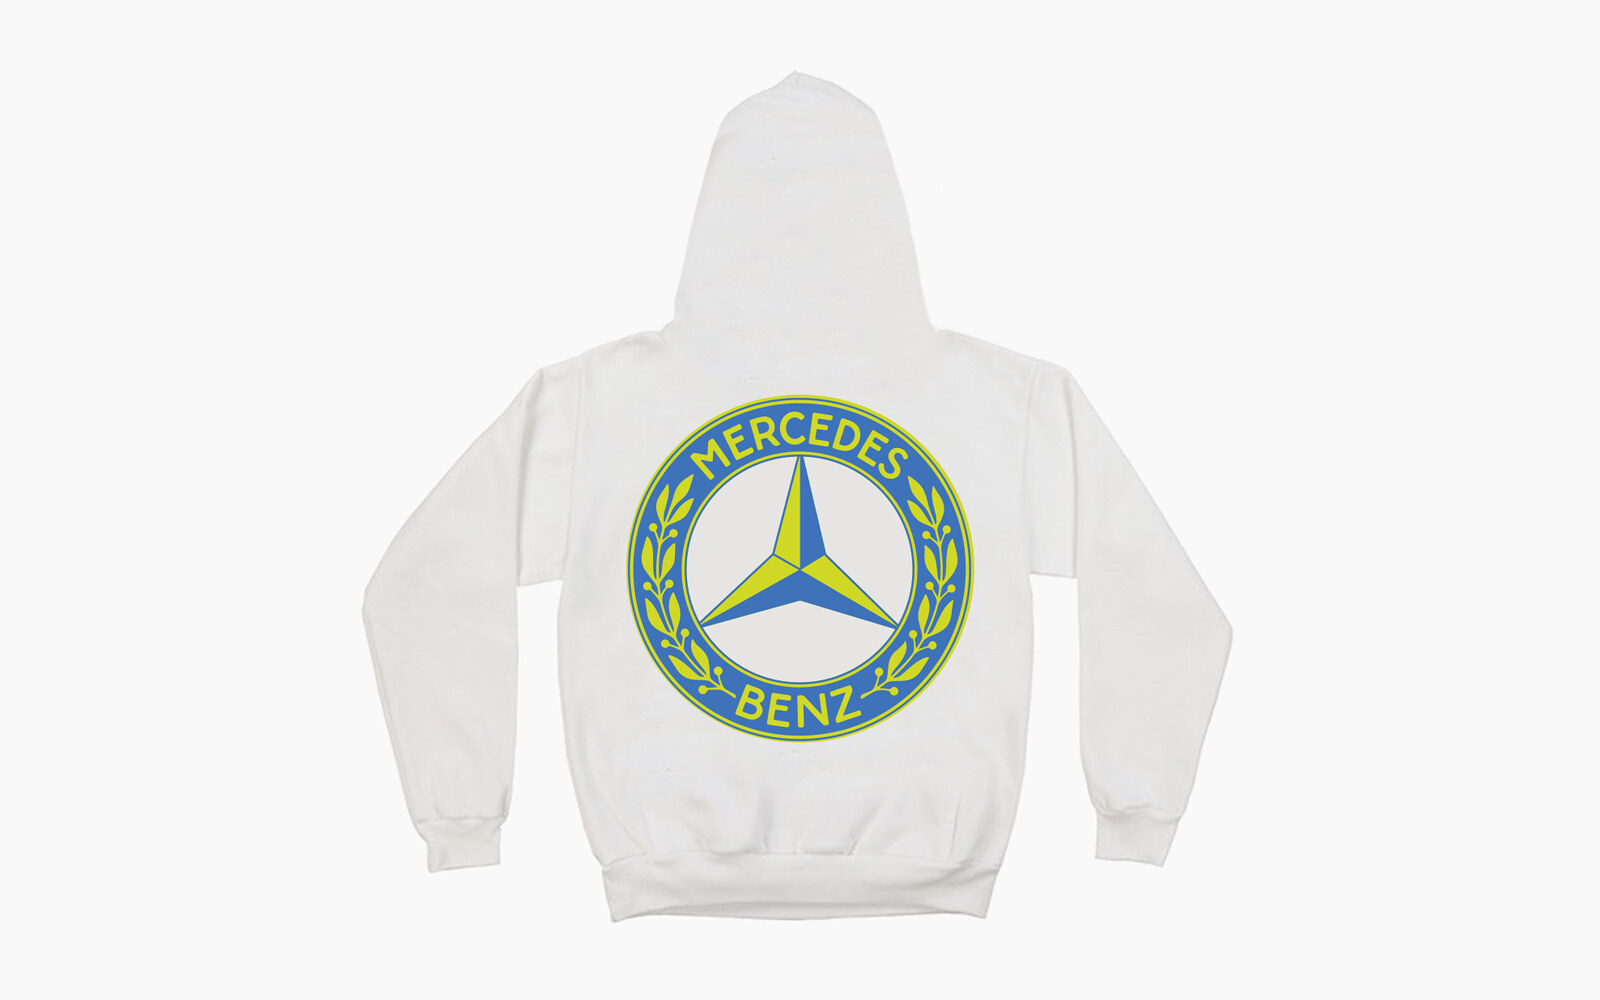 AWGE Mercedes Benz Asap Rocky Capsule Collection